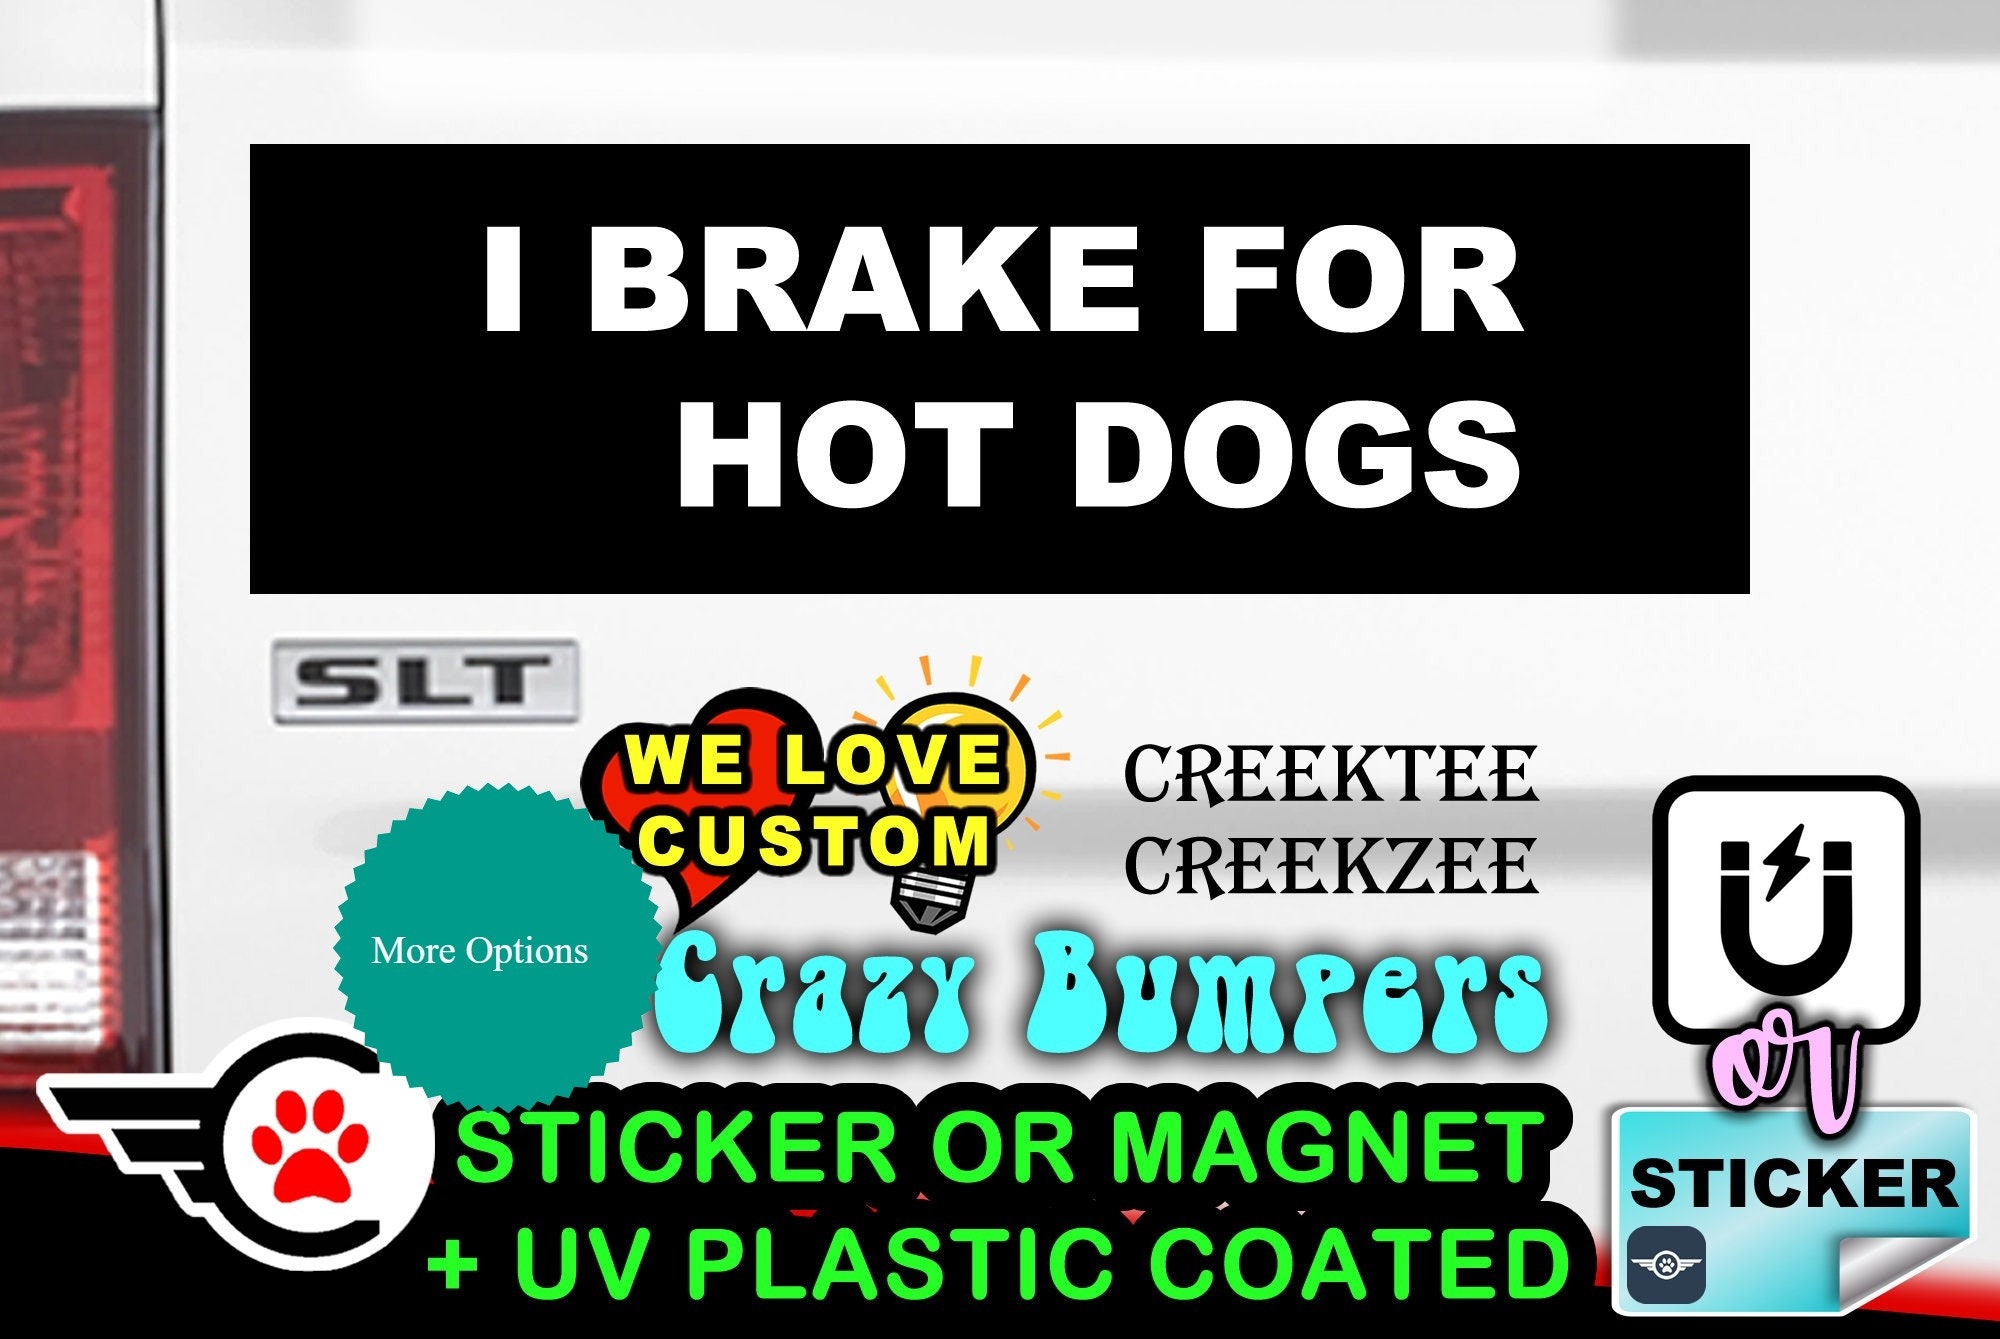 Magnet sheets for bumper stickers - Blank Bumper Sticker Magnet